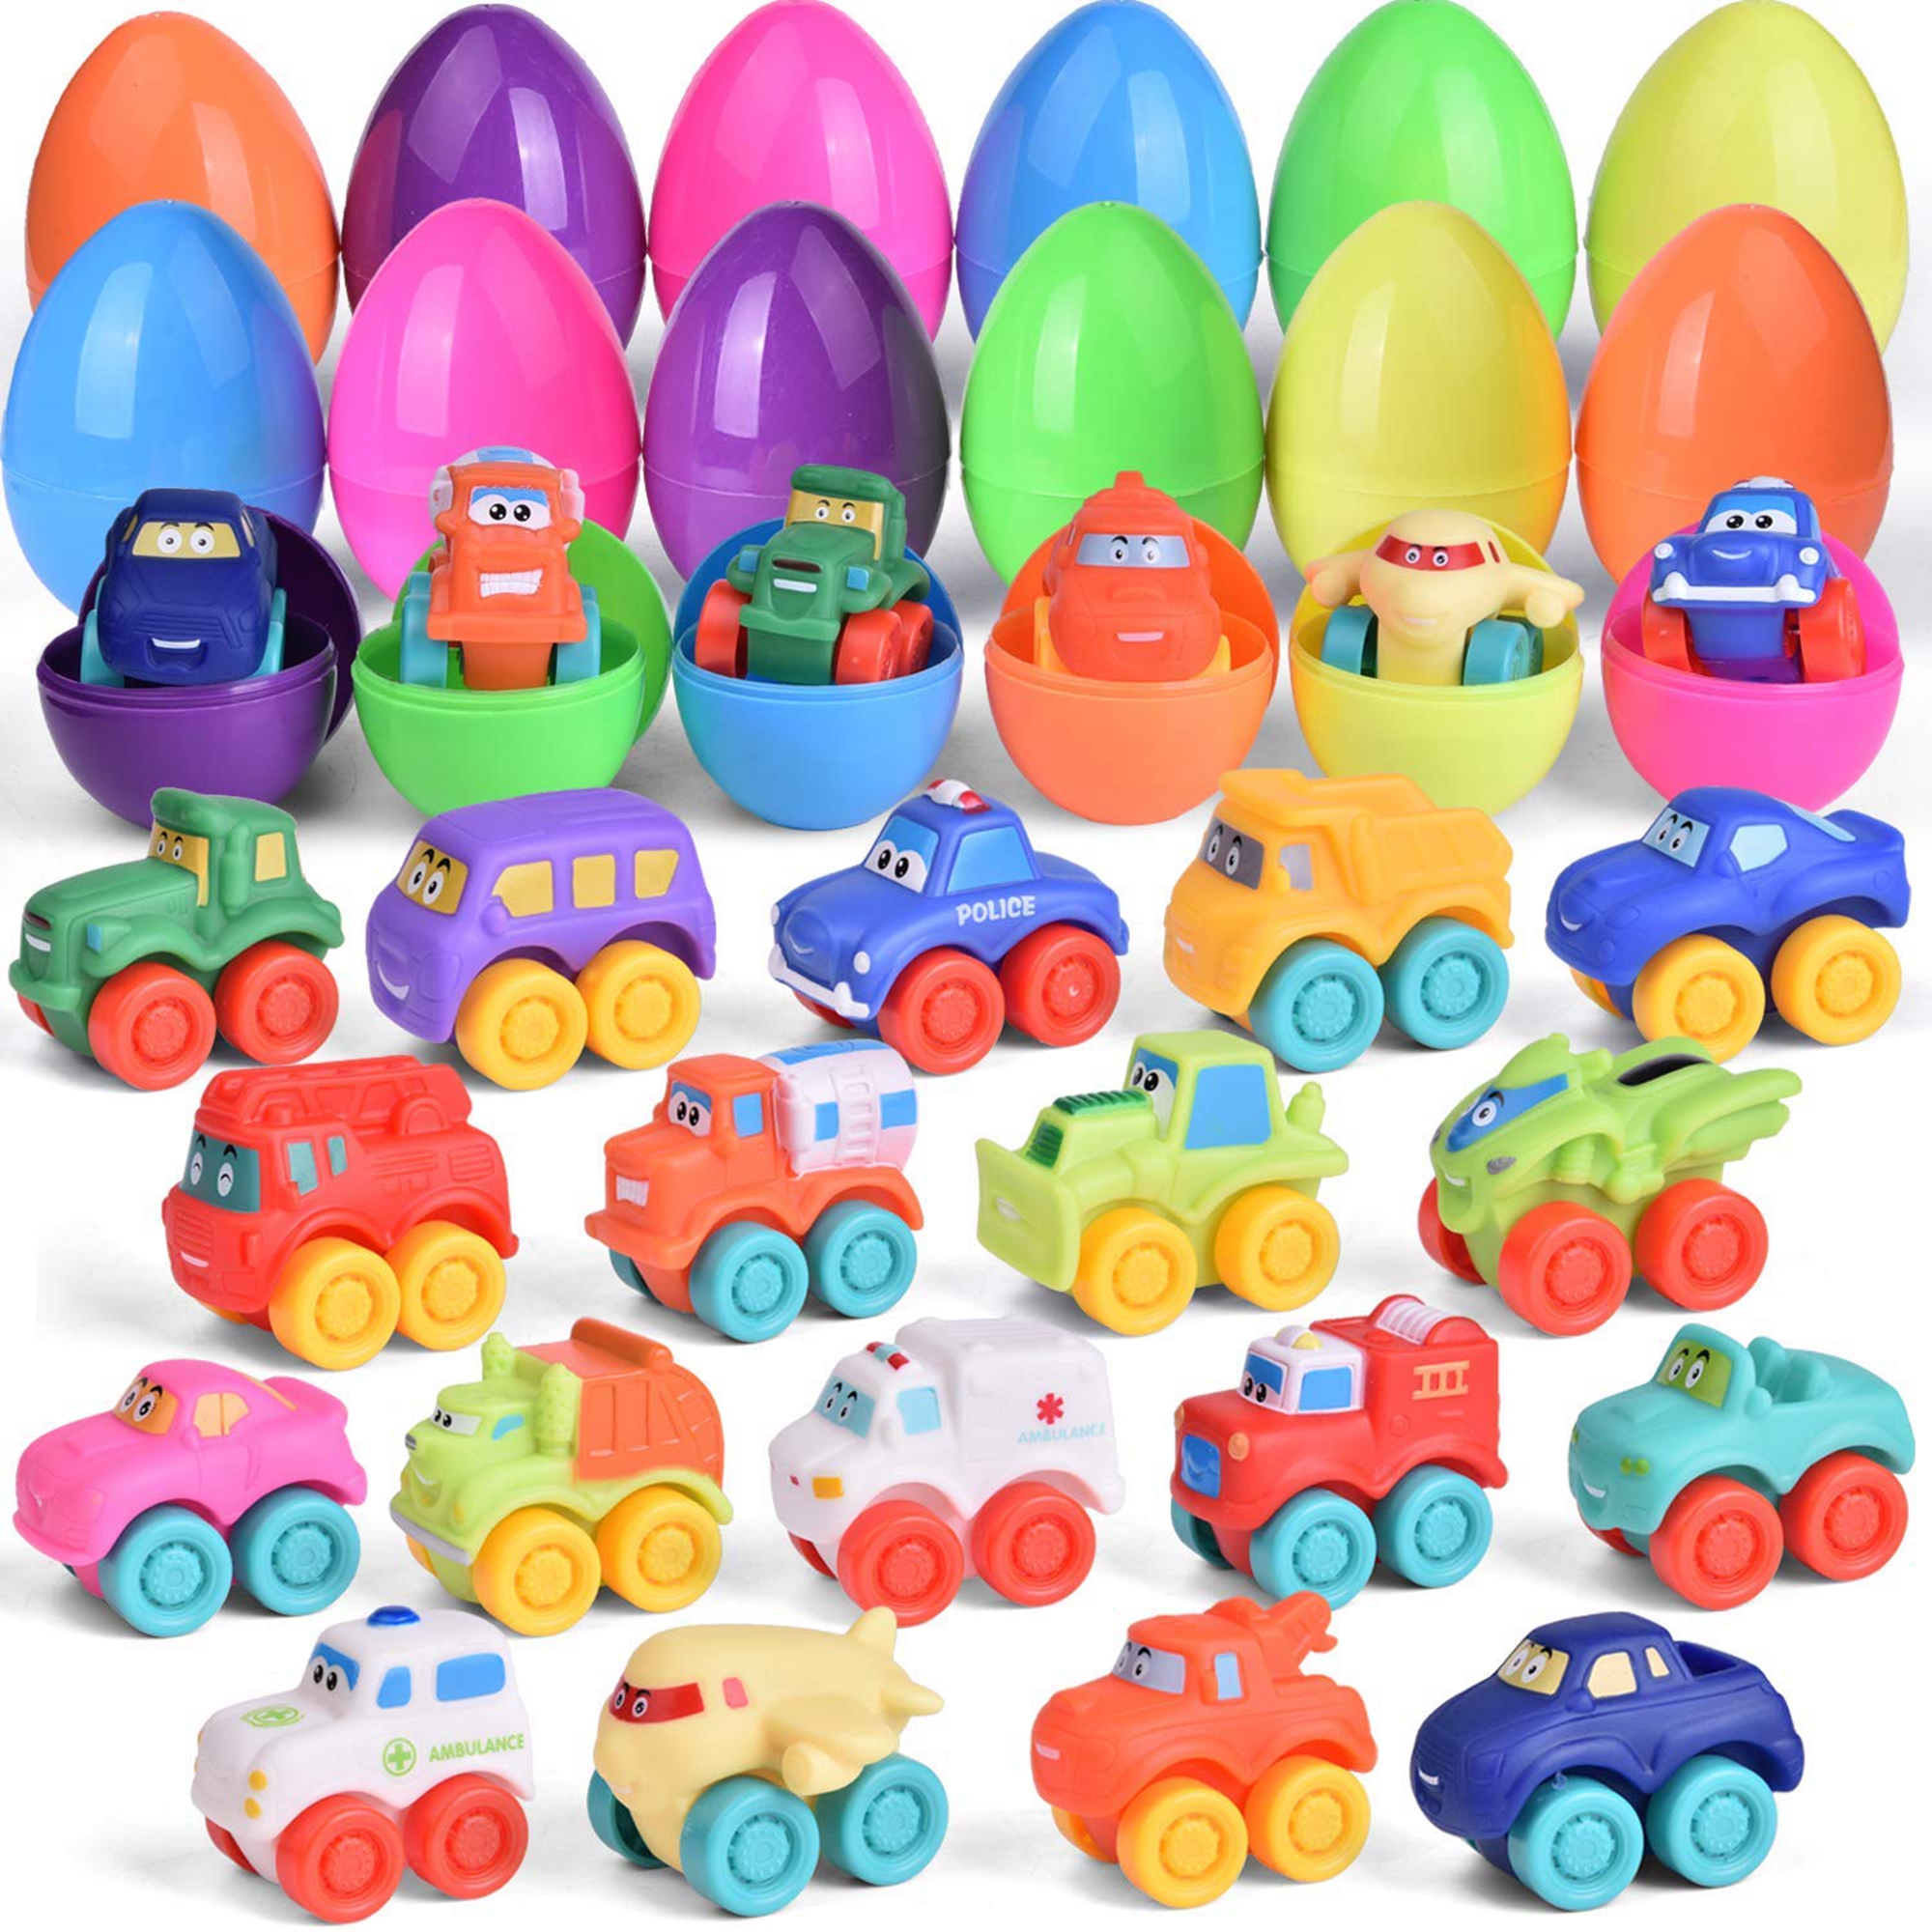 18 Pcs Easter Eggs Prefilled with Baby Cars for Easter Basket Stuffers, Soft Rubber Toy Vehicles for Baby Easter Gifts F-551 - image 2 of 4